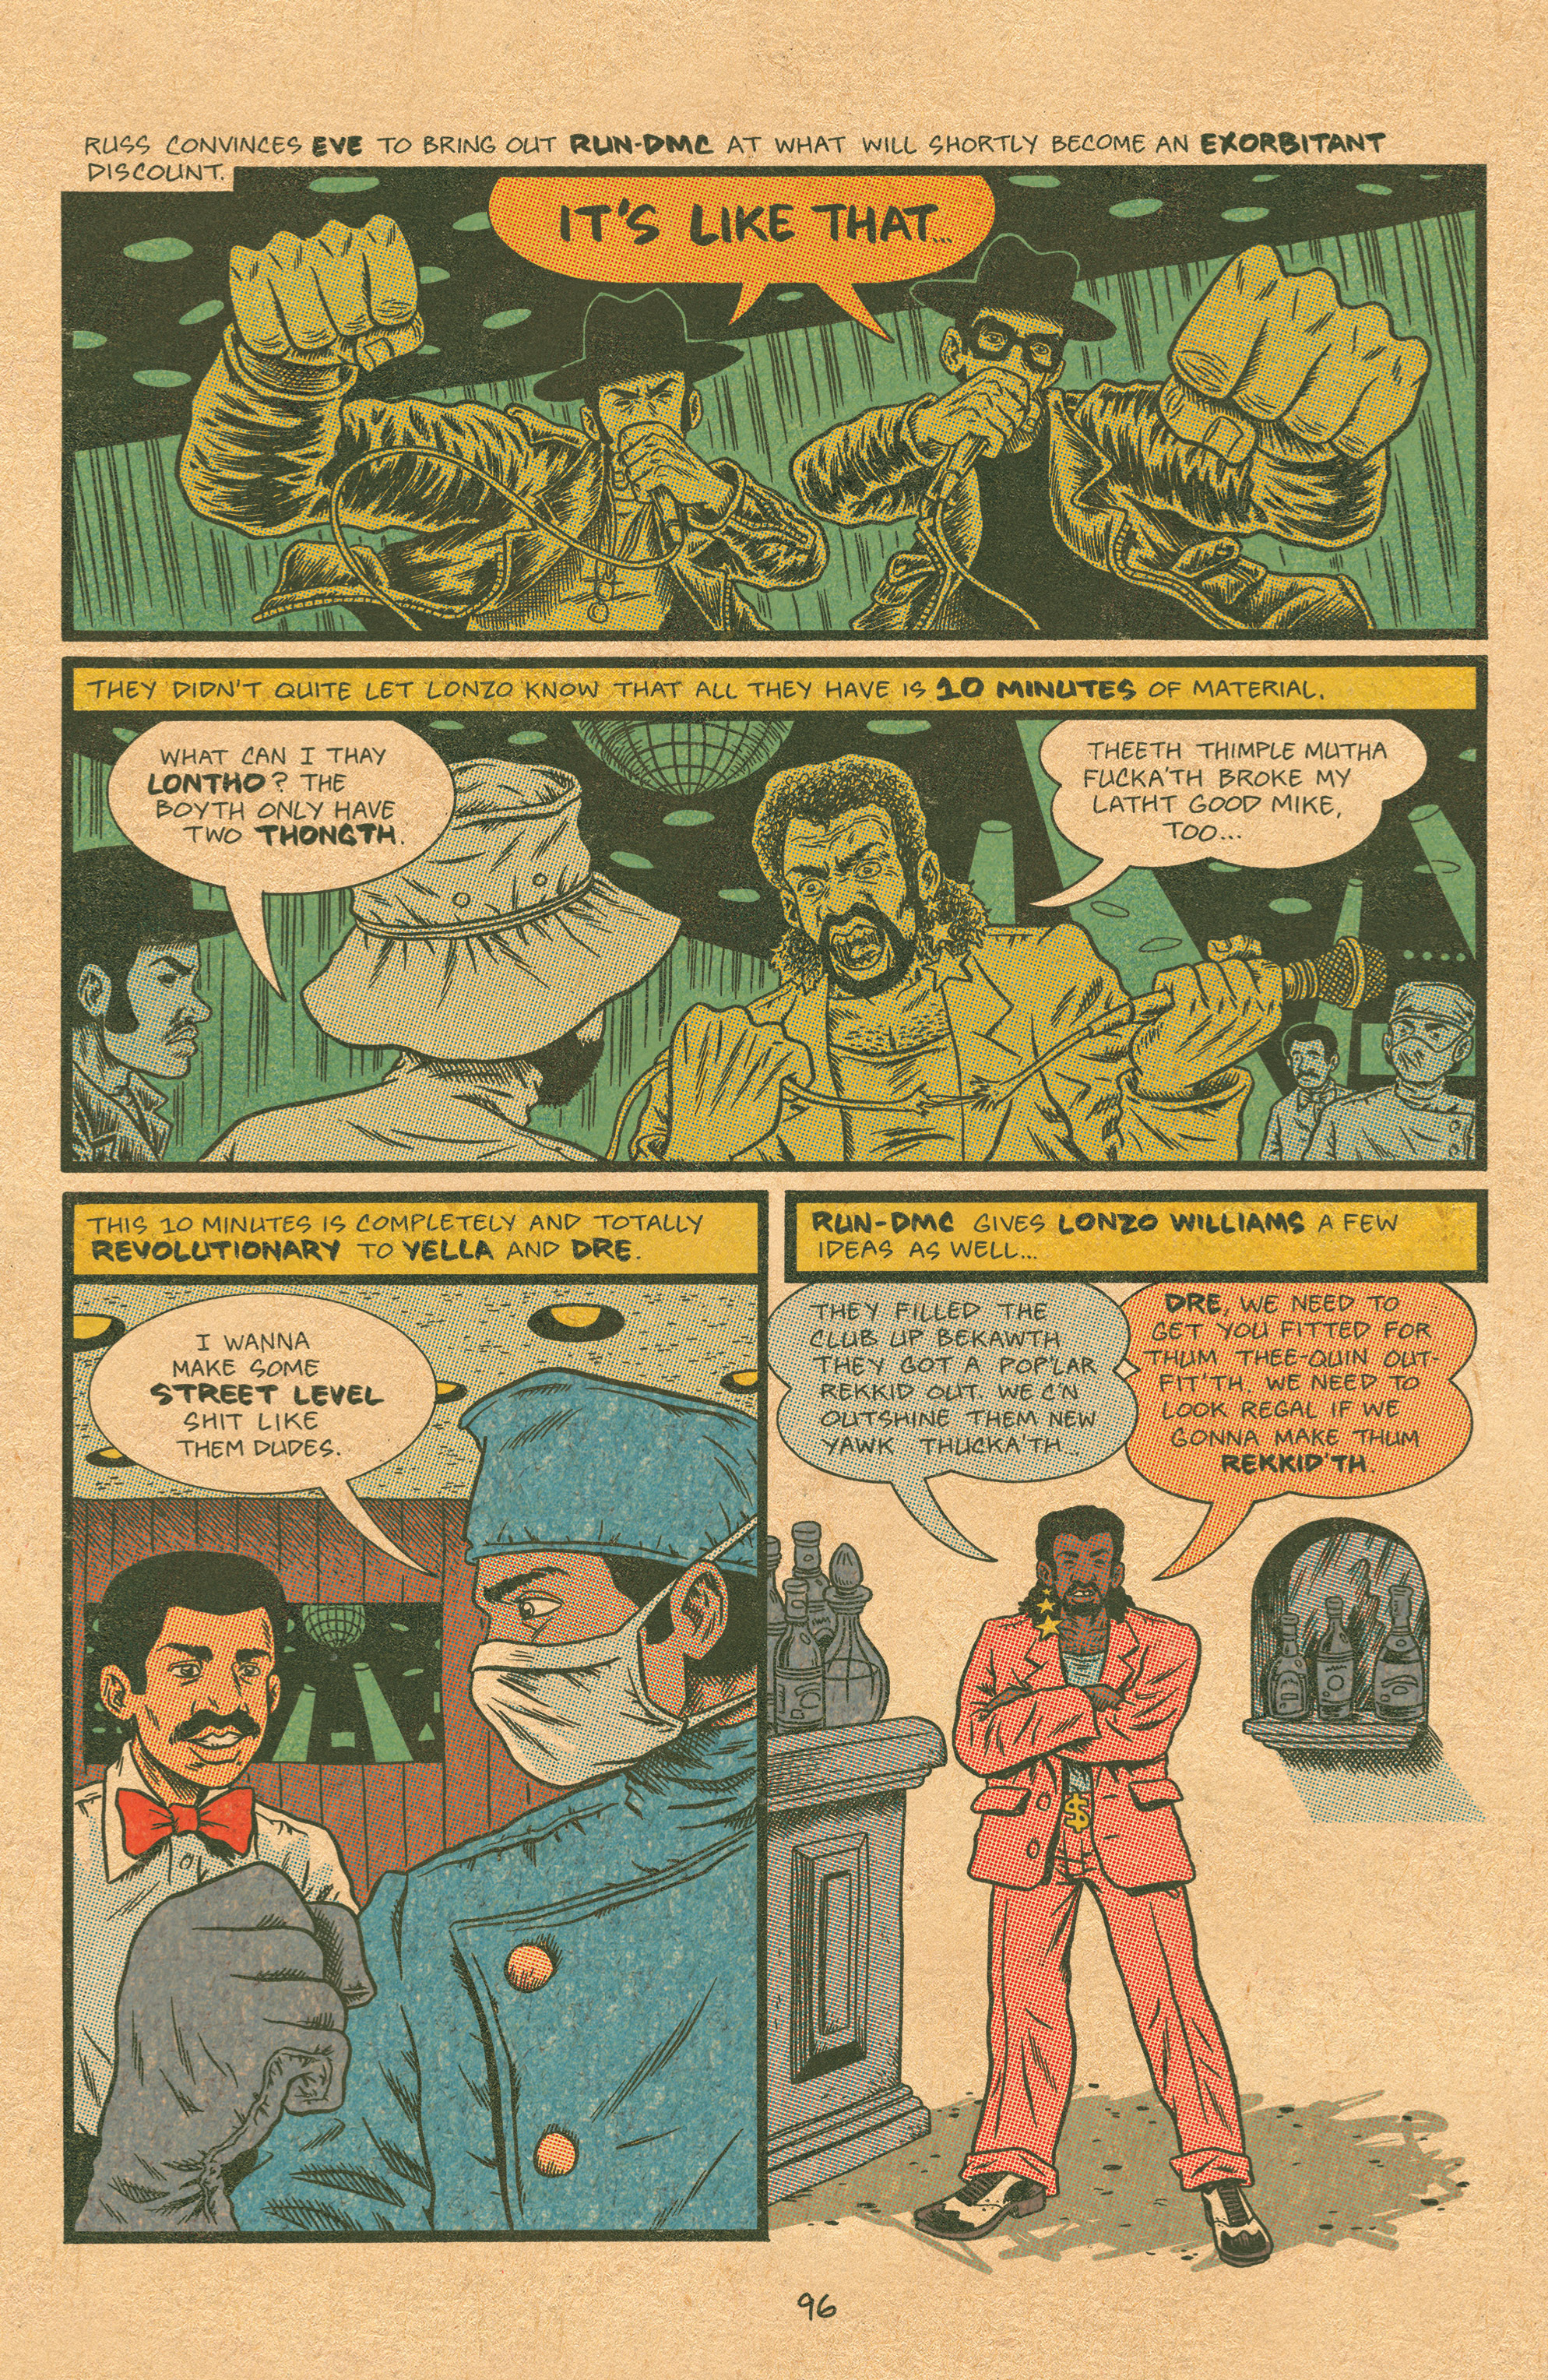 Read online Free Comic Book Day 2015 comic -  Issue # Hip Hop Family Tree Three-in-One - Featuring Cosplayers - 15